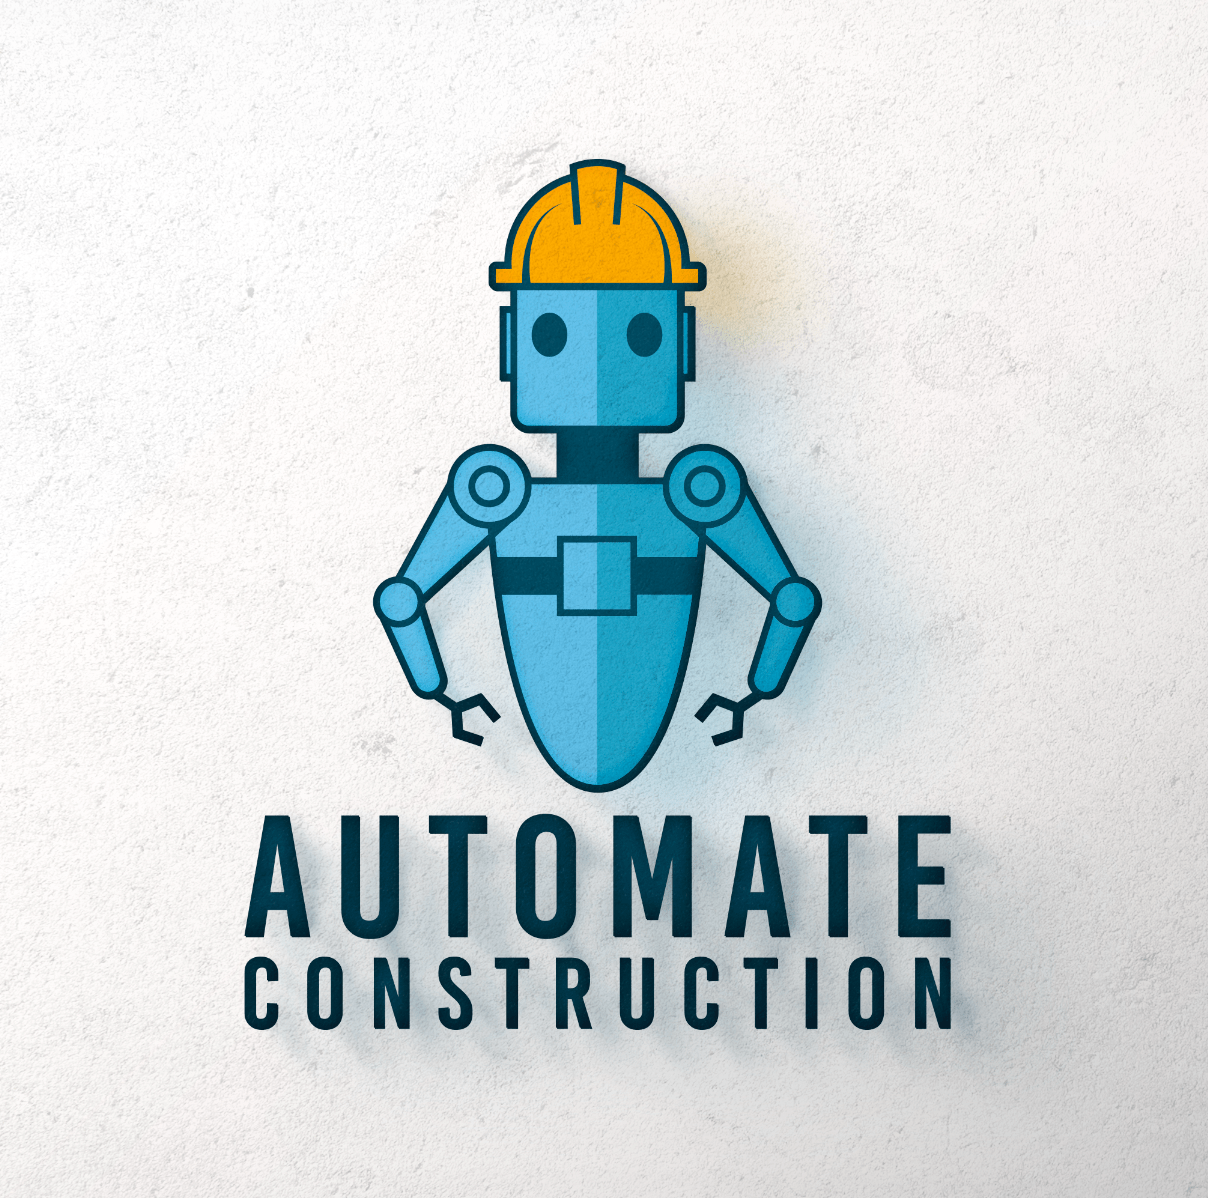 Blog feed â automate construction